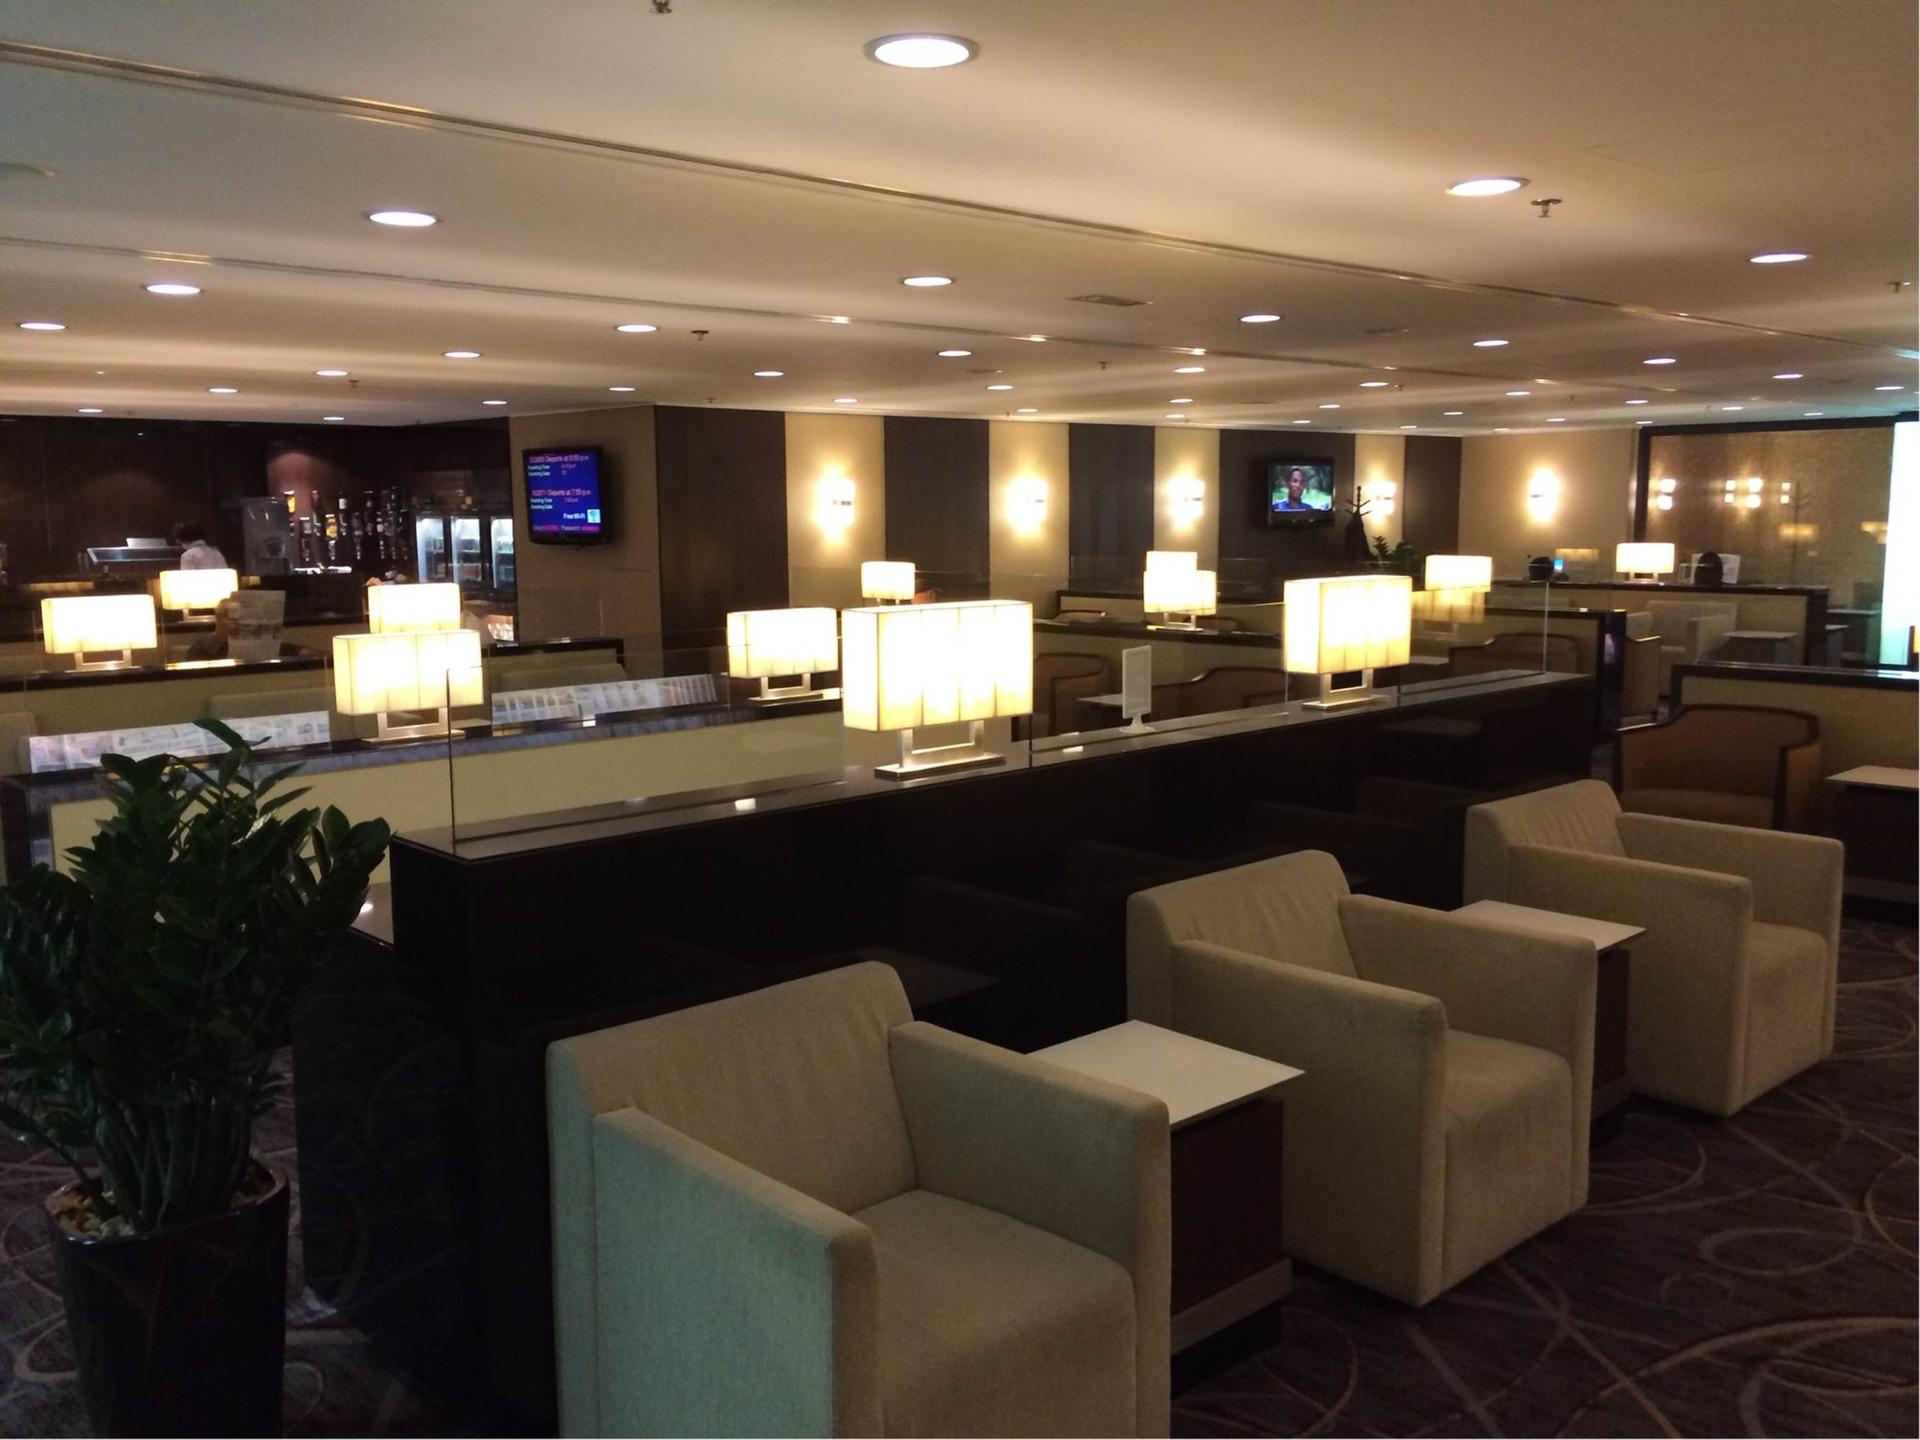 Singapore Airlines SilverKris Business Class Lounge image 66 of 68